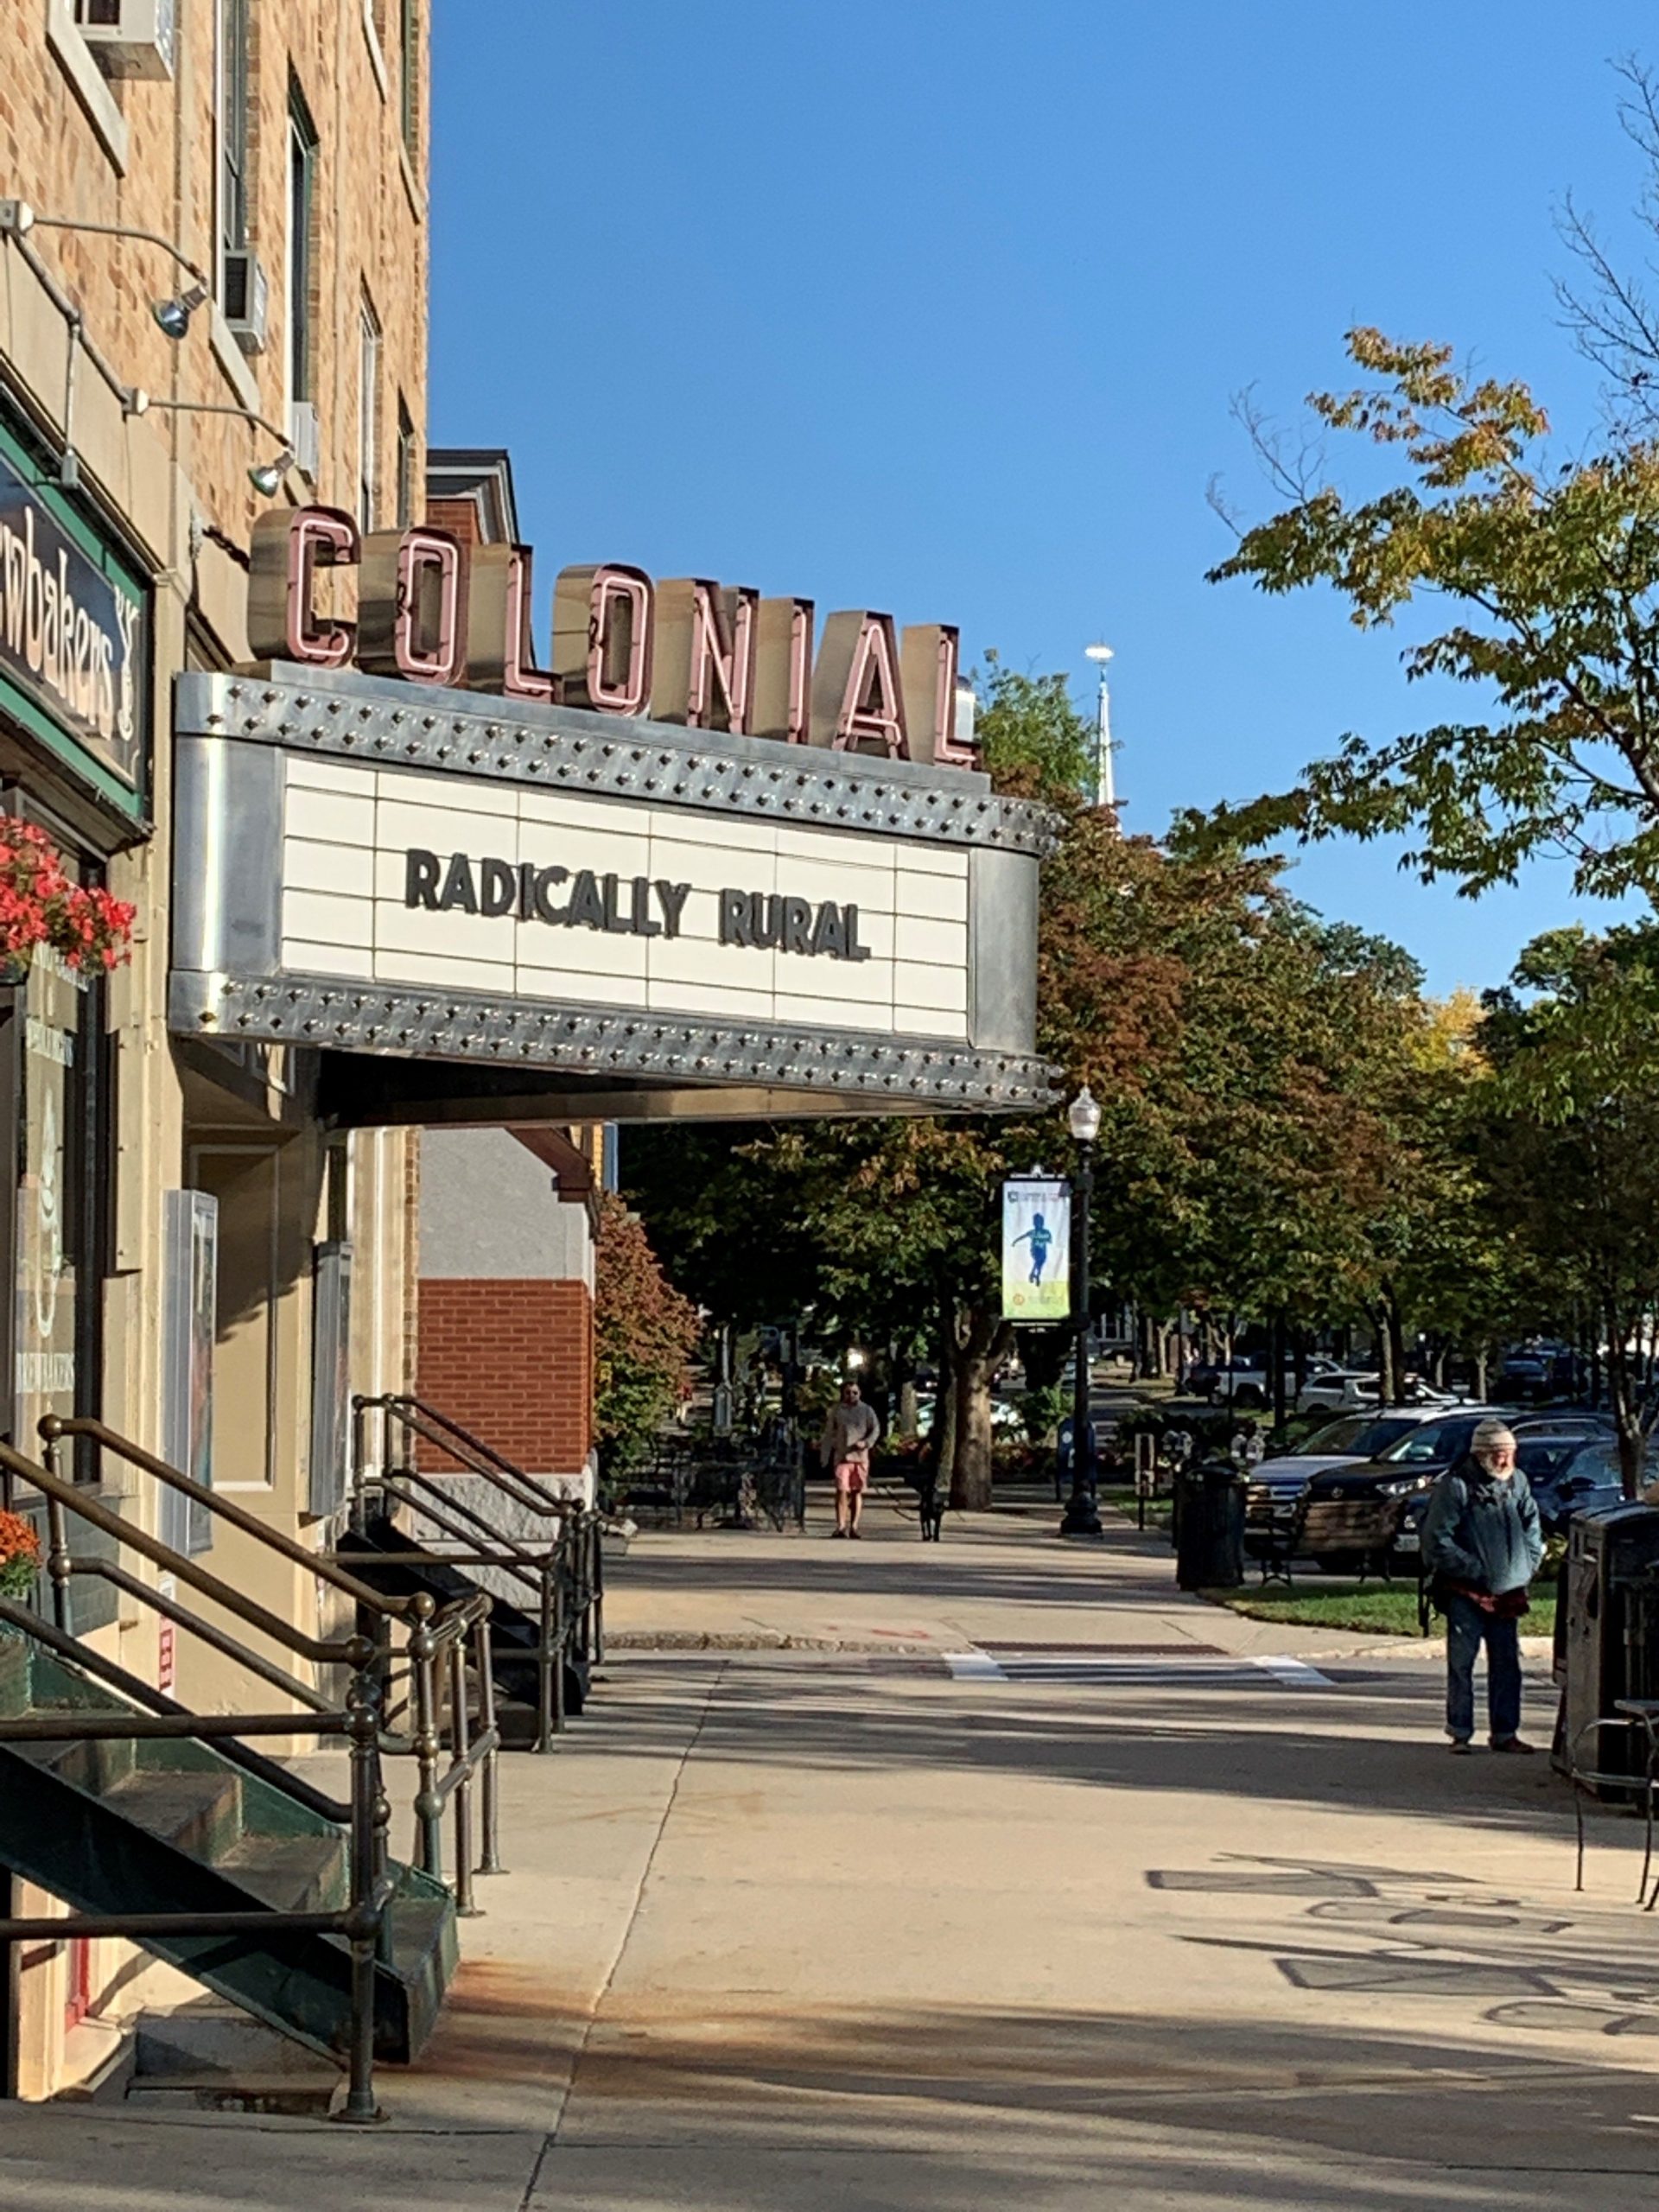 Theater sign that reads, "Radically Rural"